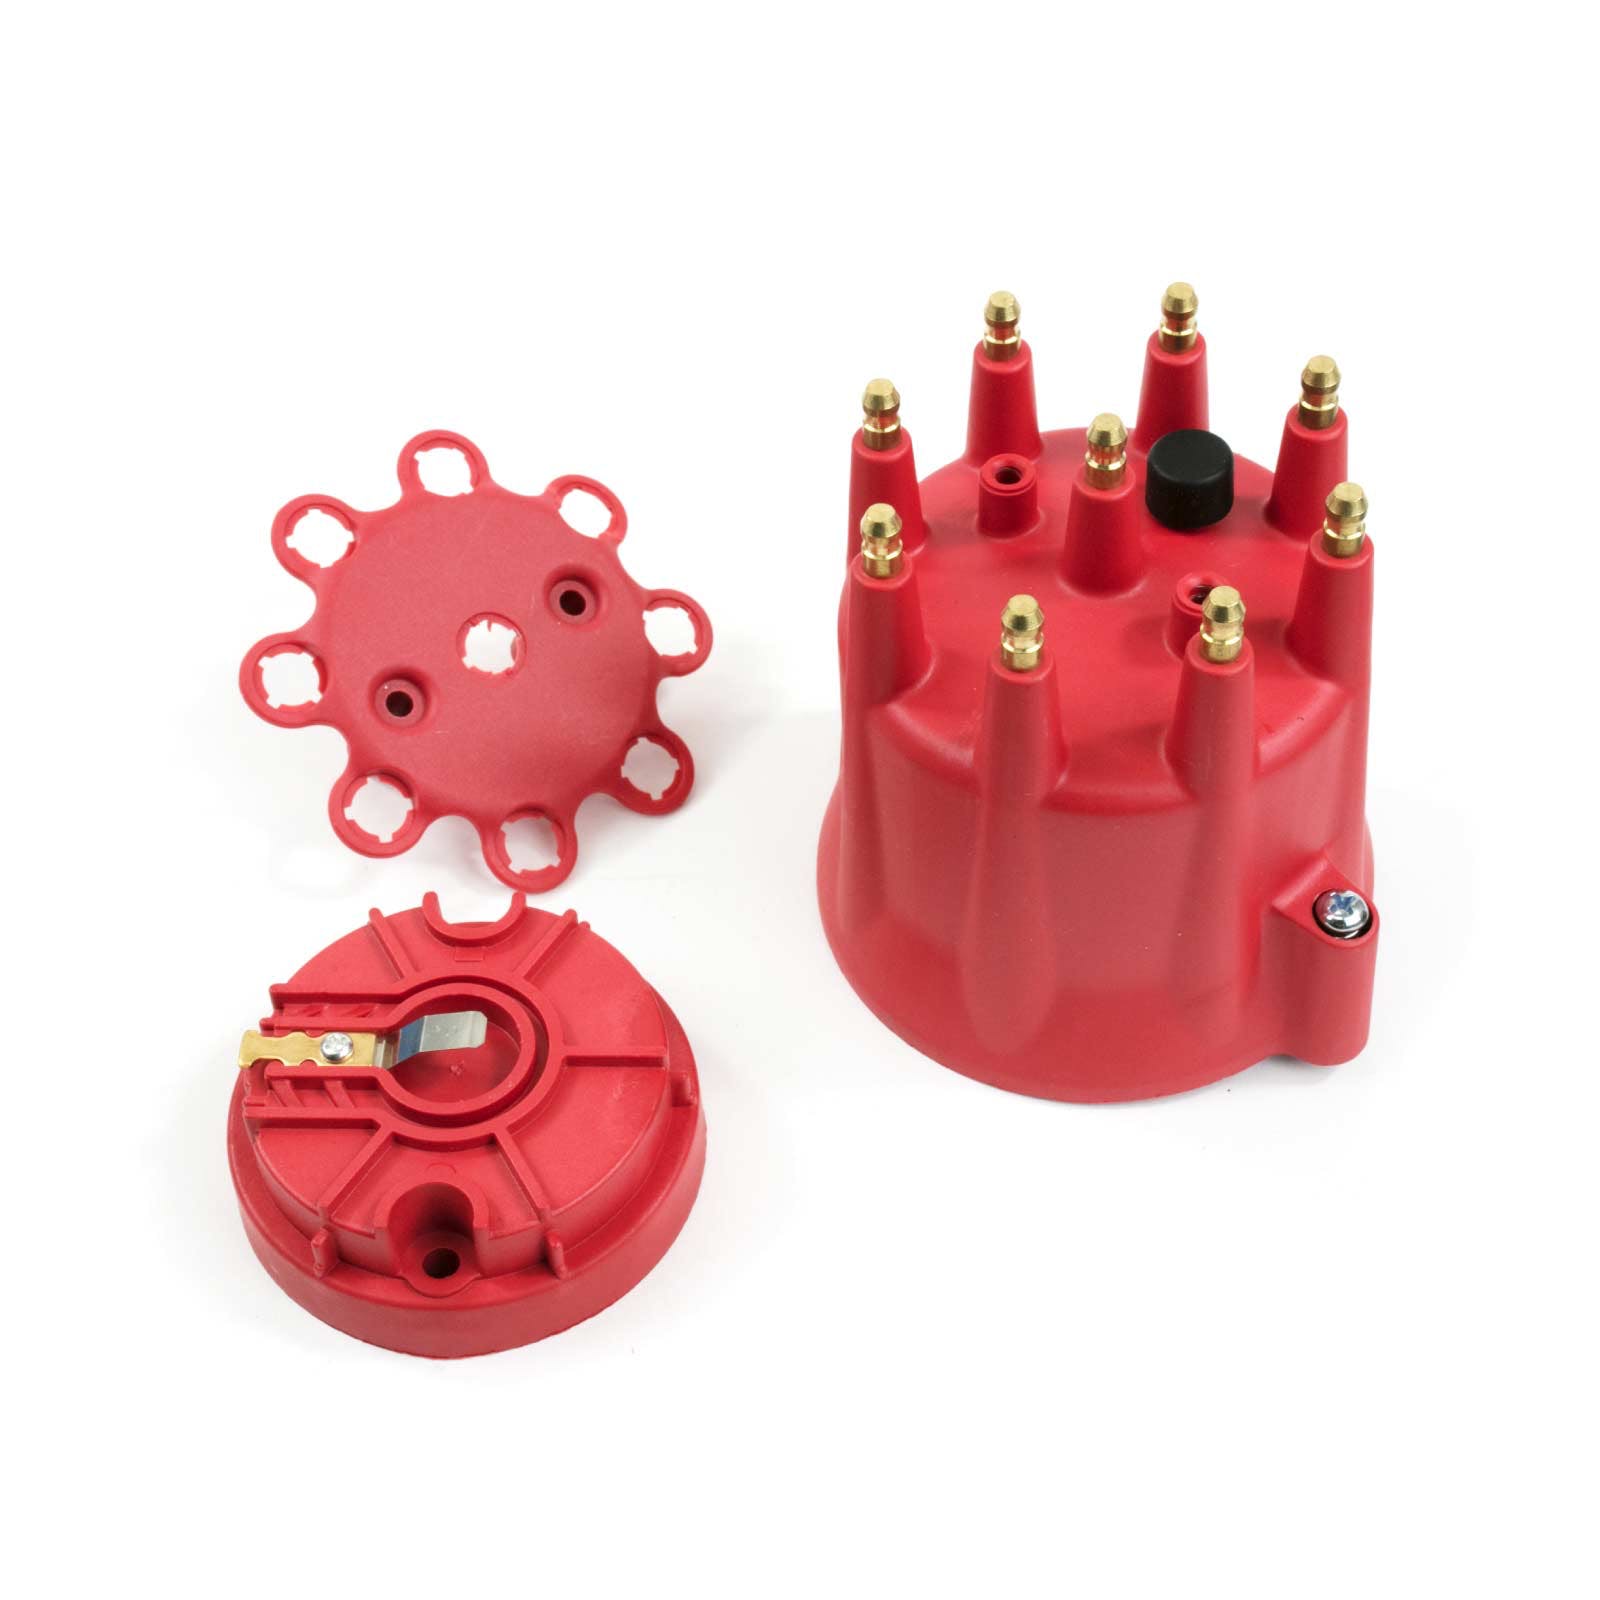 Top Street Performance JM6973R Pro Series Pro Billet Ready To Run Distributor Cap and Rotor Kit Red